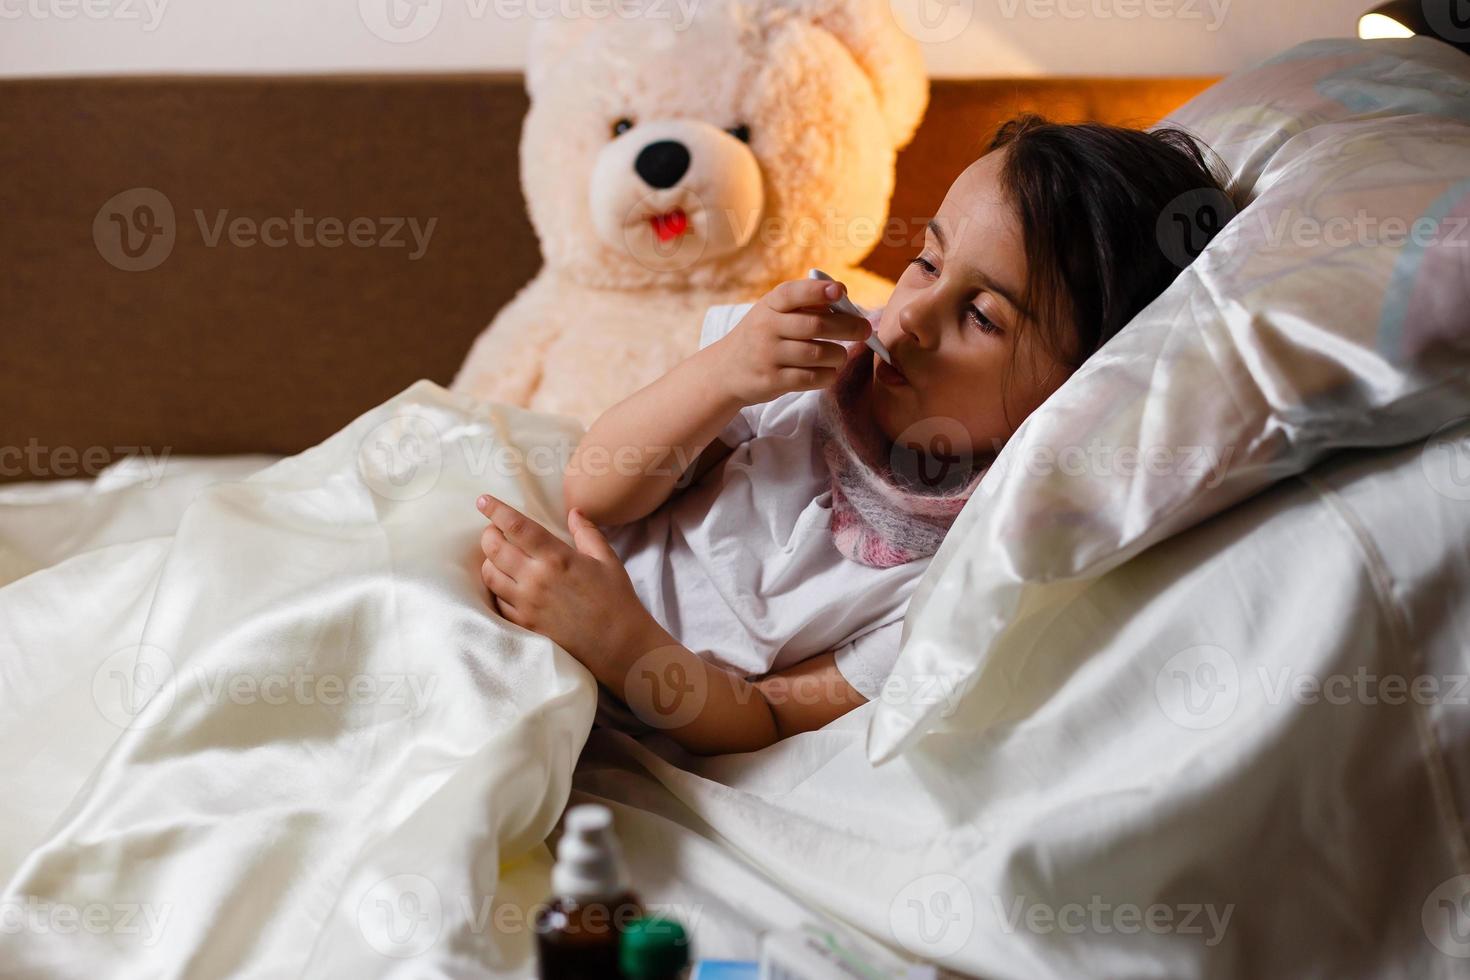 Sick girl with a thermometer in mouth lying in bed grumpy face photo